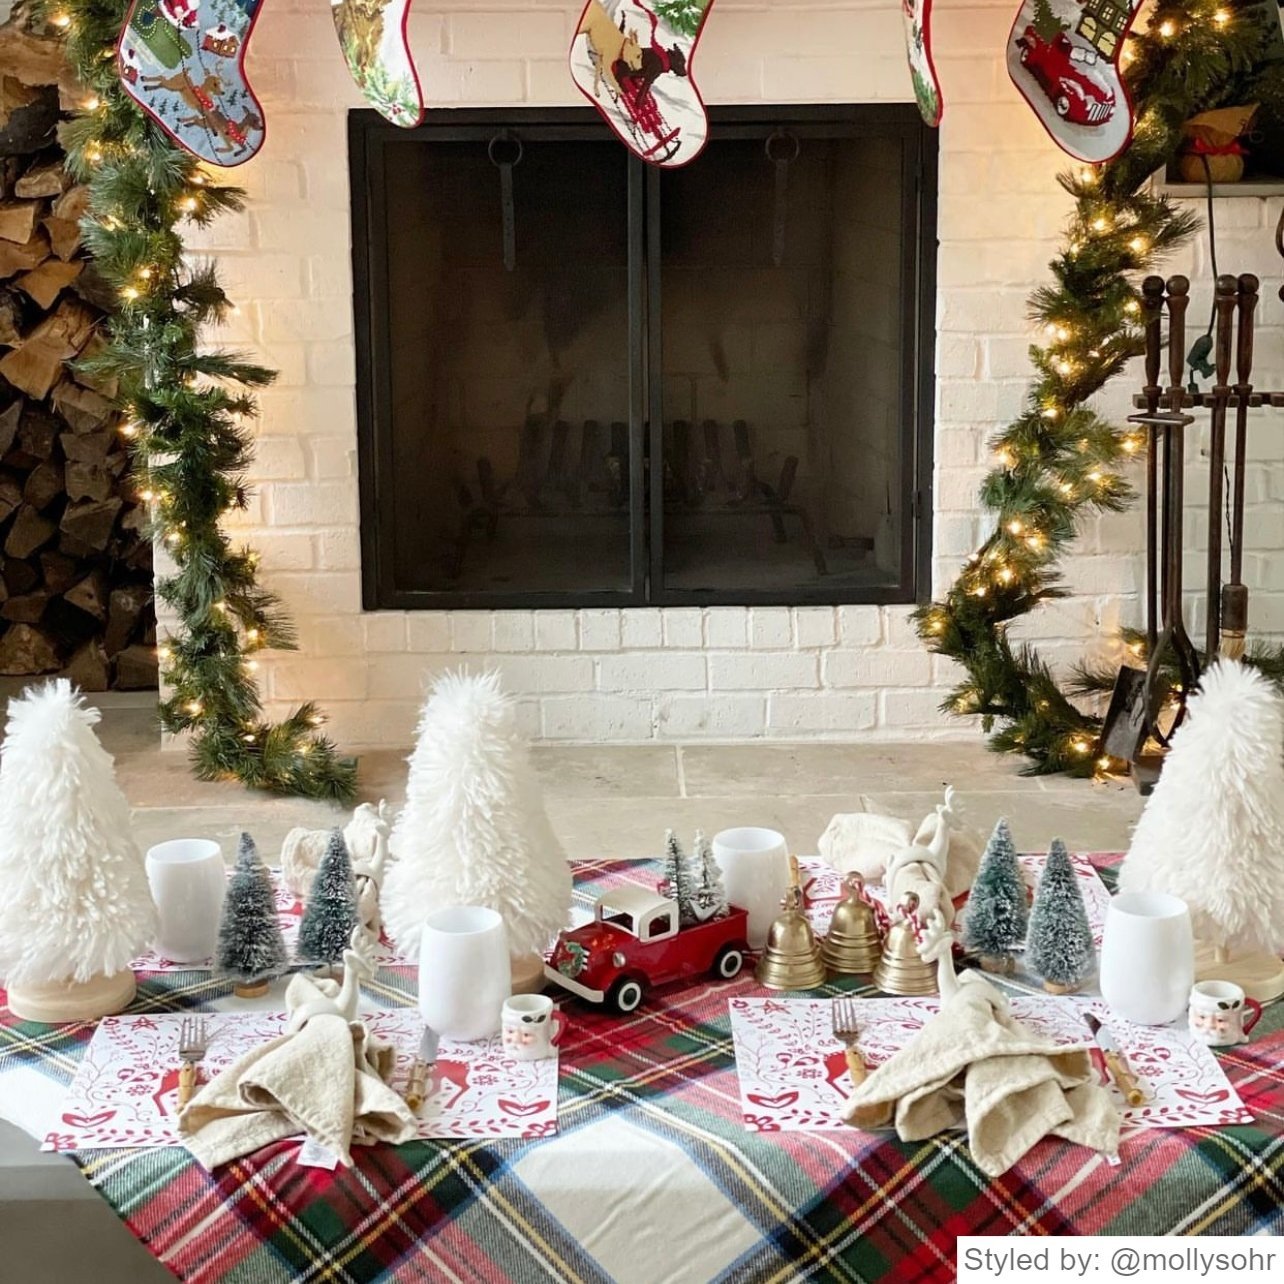 Christmas spread in front of a fire place with red and white Reindeer Paper Placemats and red, white and green holiday decor.